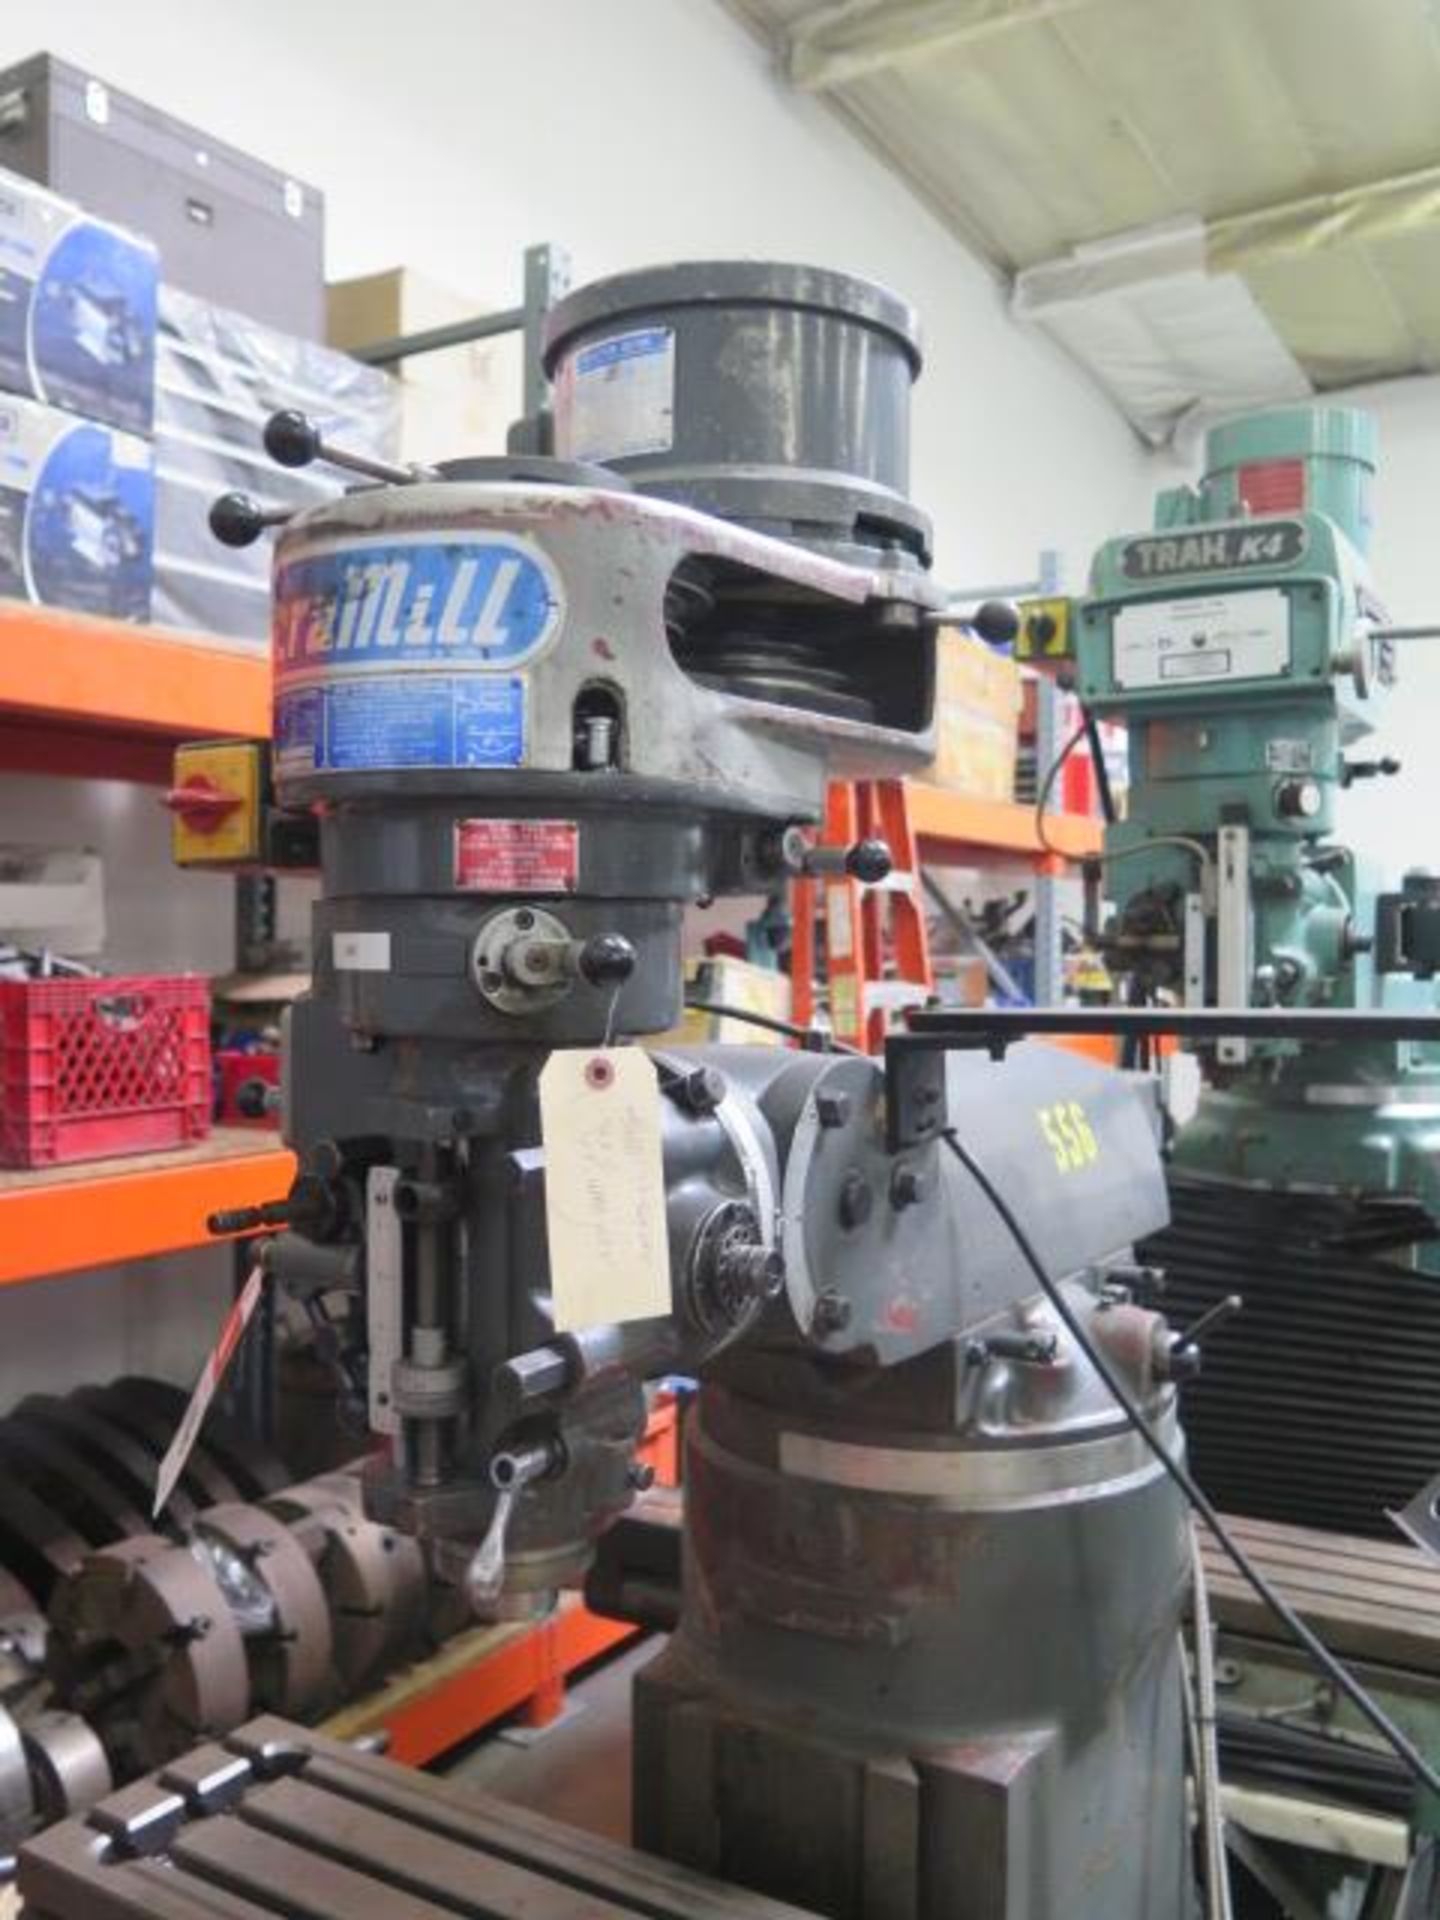 Acra Mill Vertical Mill s/n 504689 w/ Mitutoyo KS Counter Programmable DRO, 2Hp Motor, 80-5440 - Image 5 of 12